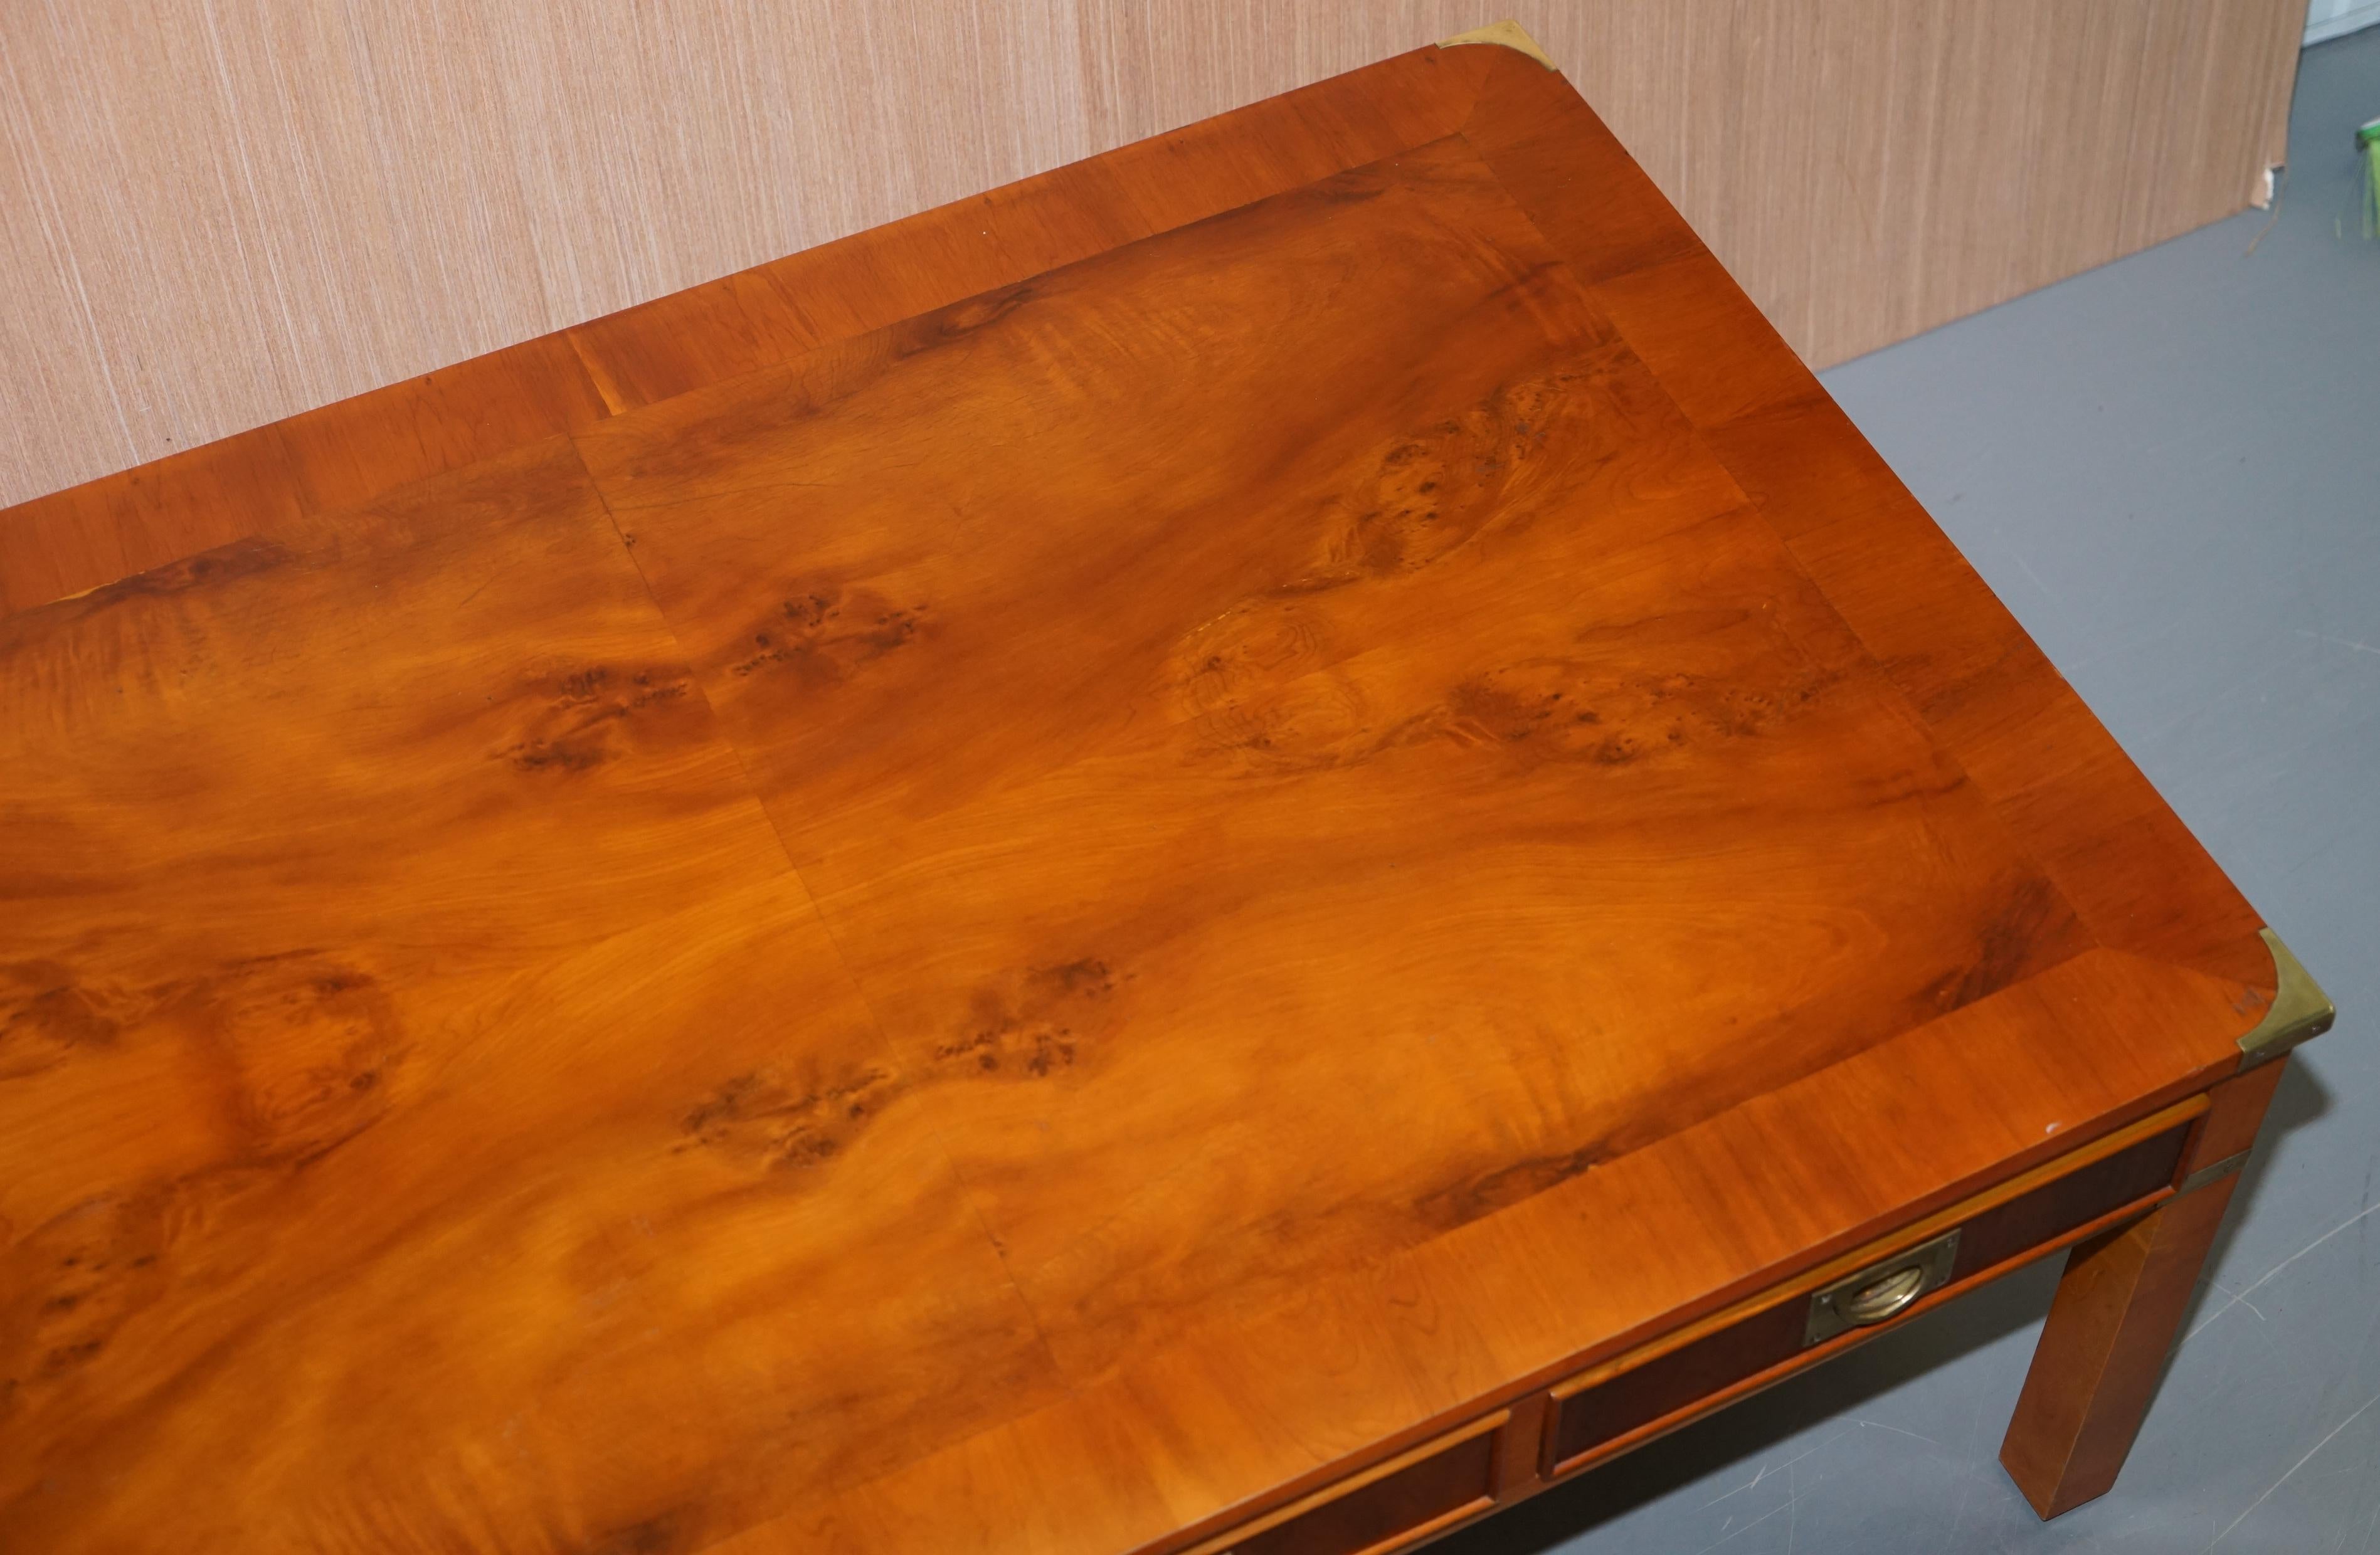 Hand-Crafted Stunning Burr Yew Harrods Kennedy Military Campaign Coffee Table 6 Drawers Total